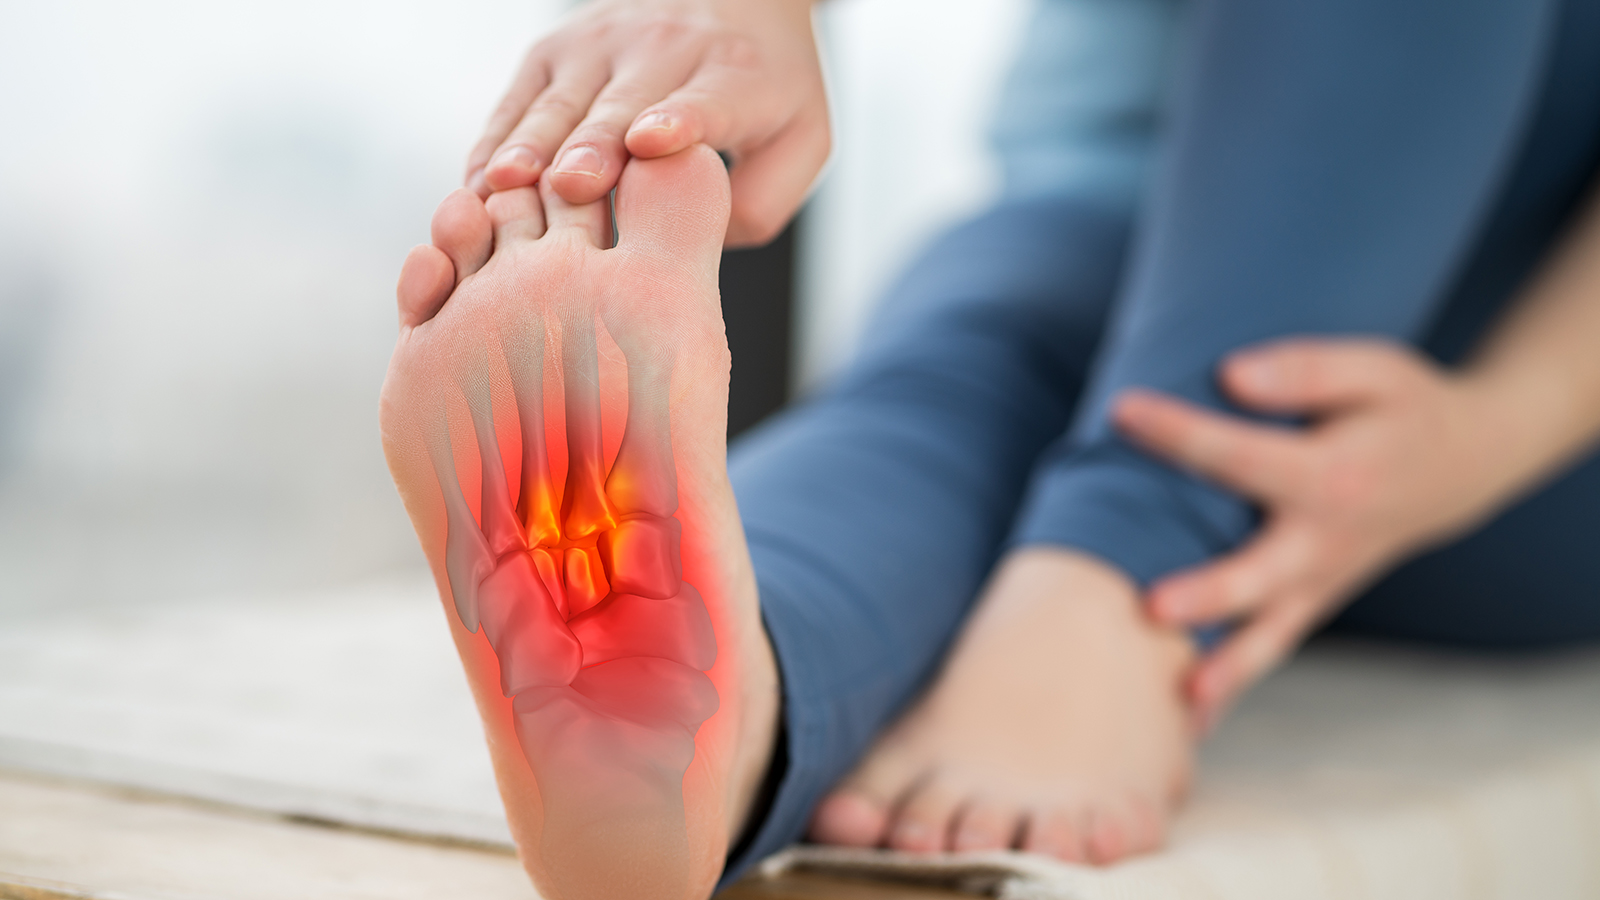 5 Do's and Don'ts when you have Plantar Fasciitis - Foot and Ankle Clinic